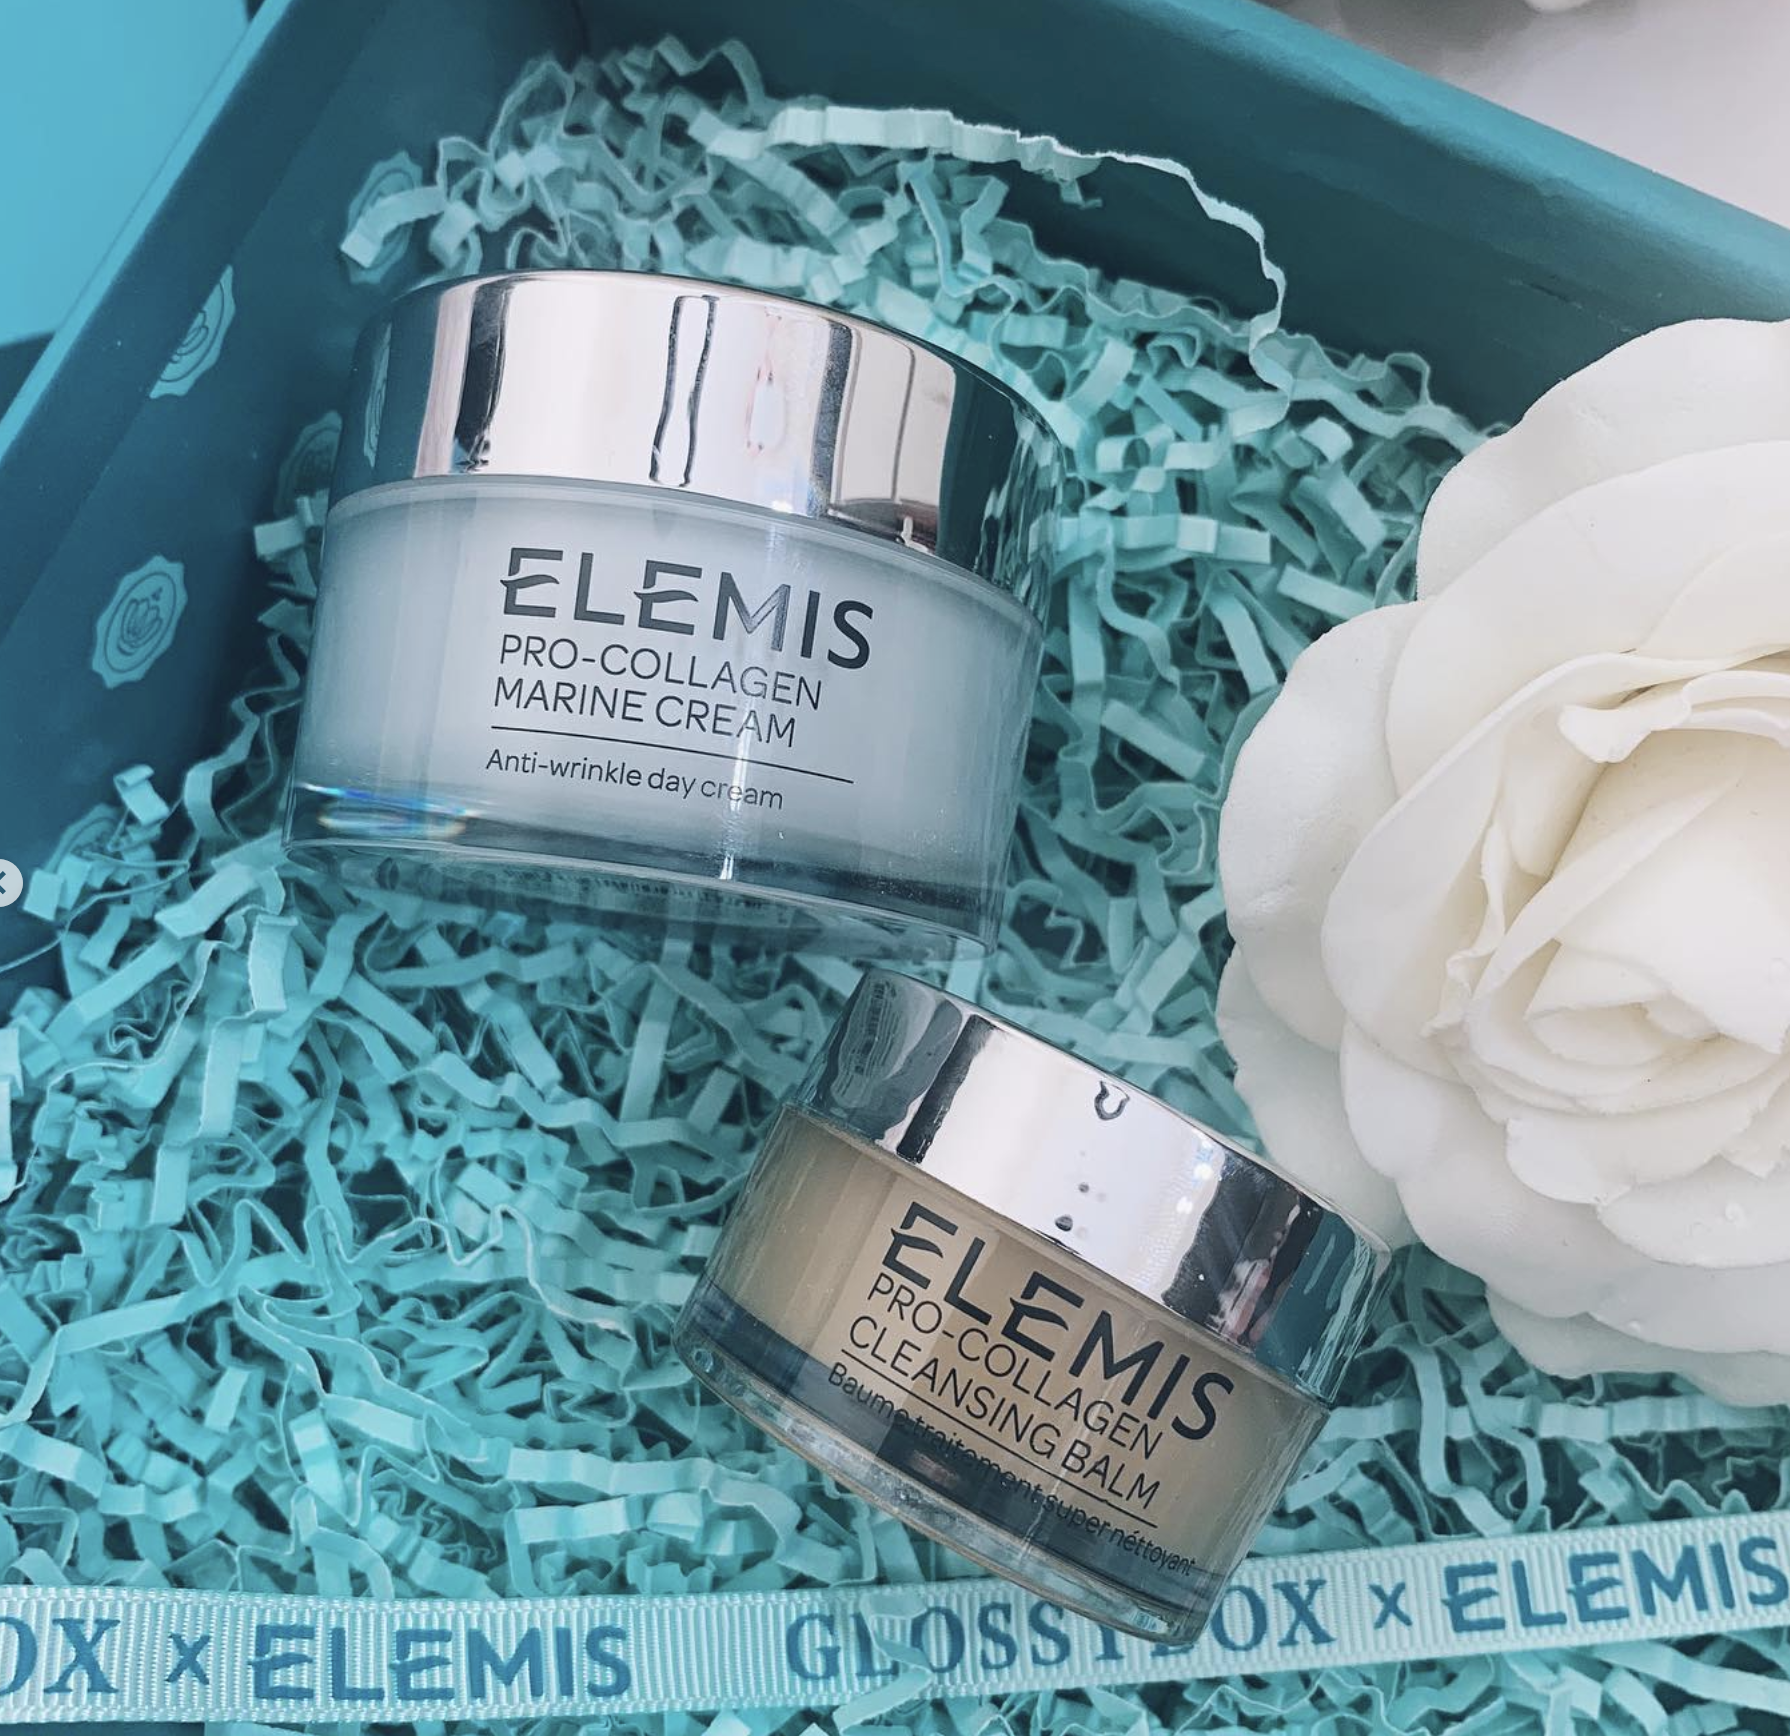 Pro-Collagen Cleansing Balm - Glossybox x Elemis Collaboration February 2020 - Miss Boux